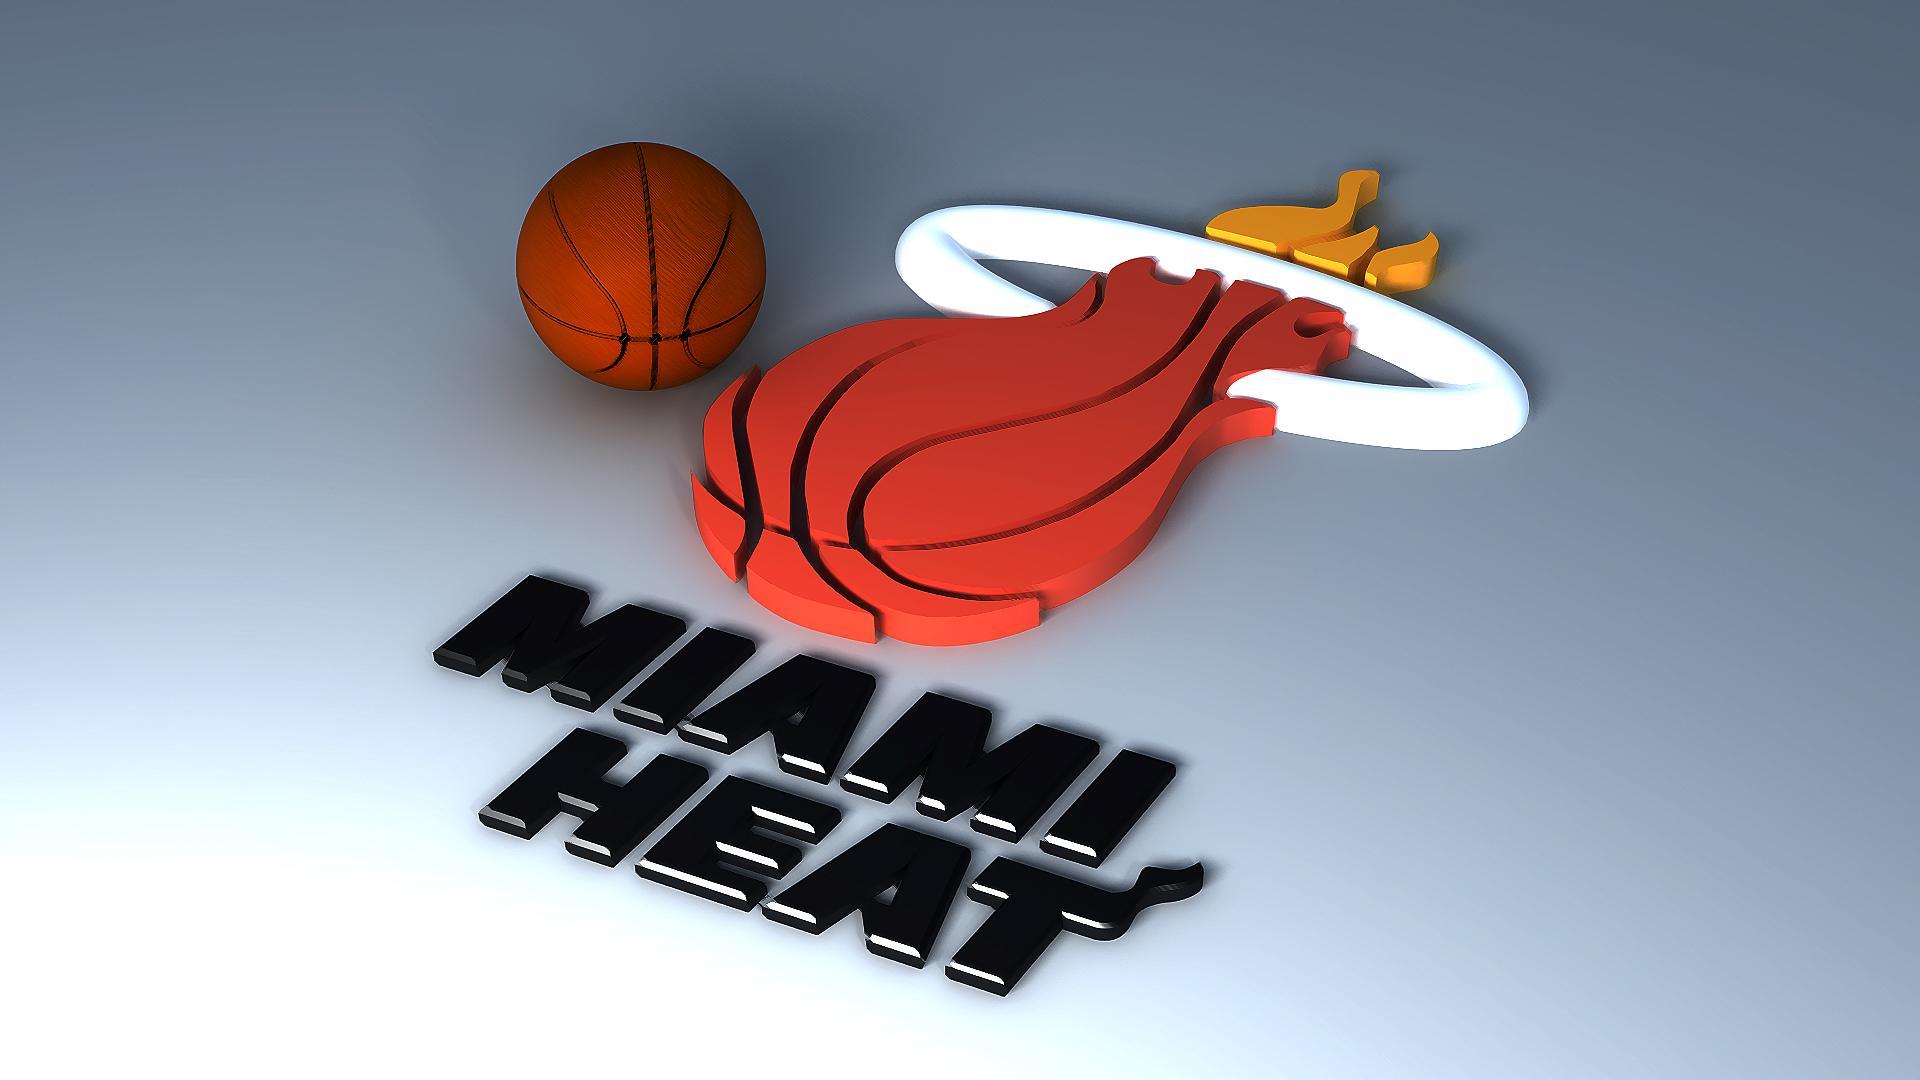 Miami Cool Logo - Cool Miami Heat Basketball Team 3D Logo Picture Gallery HD ...